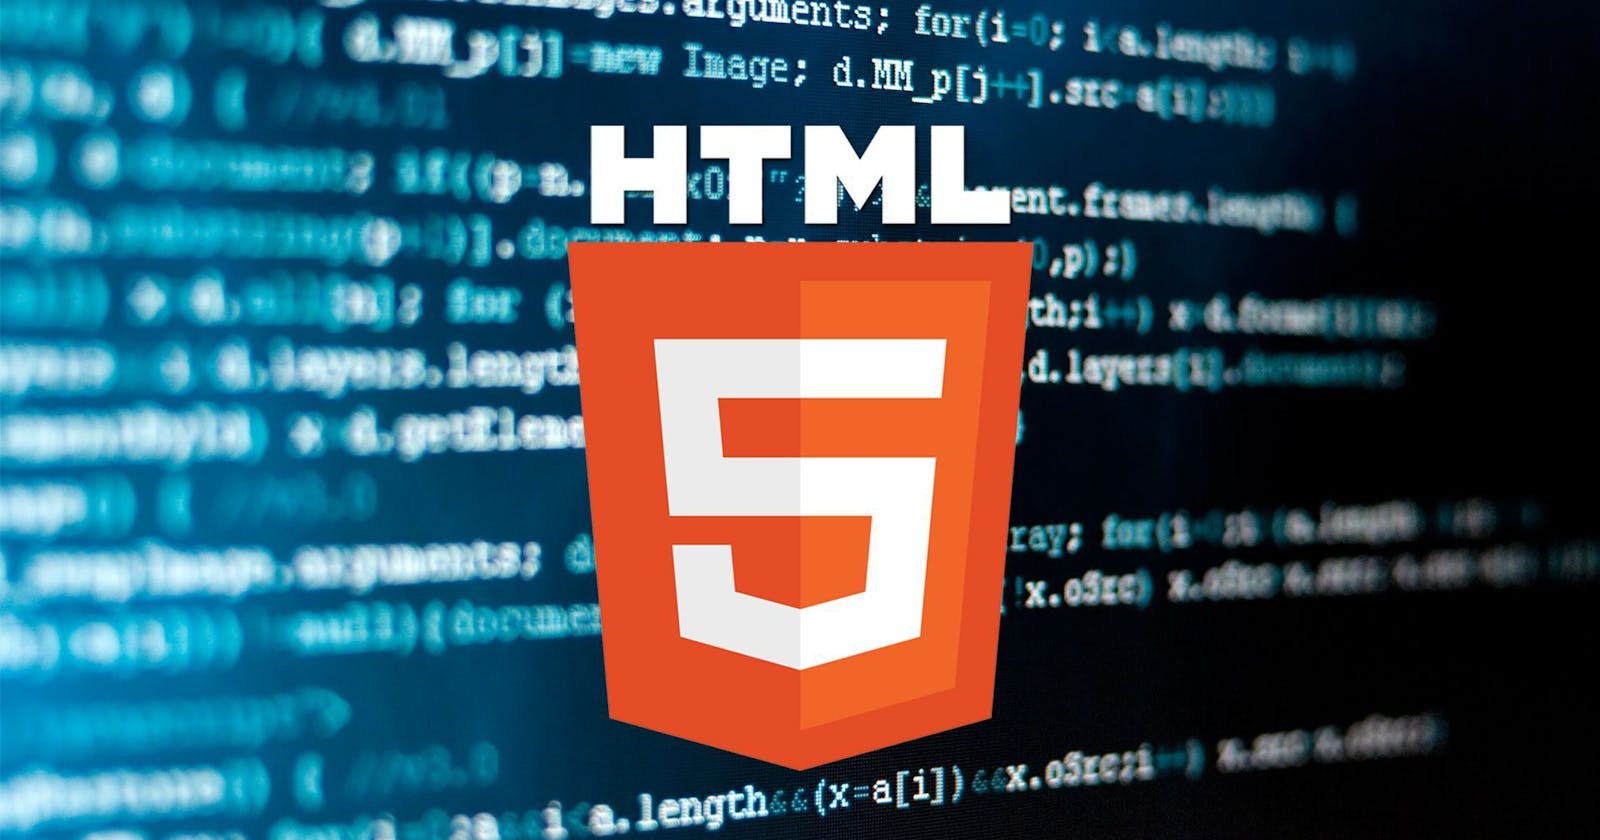 "Master HTML in Just 21 Days"